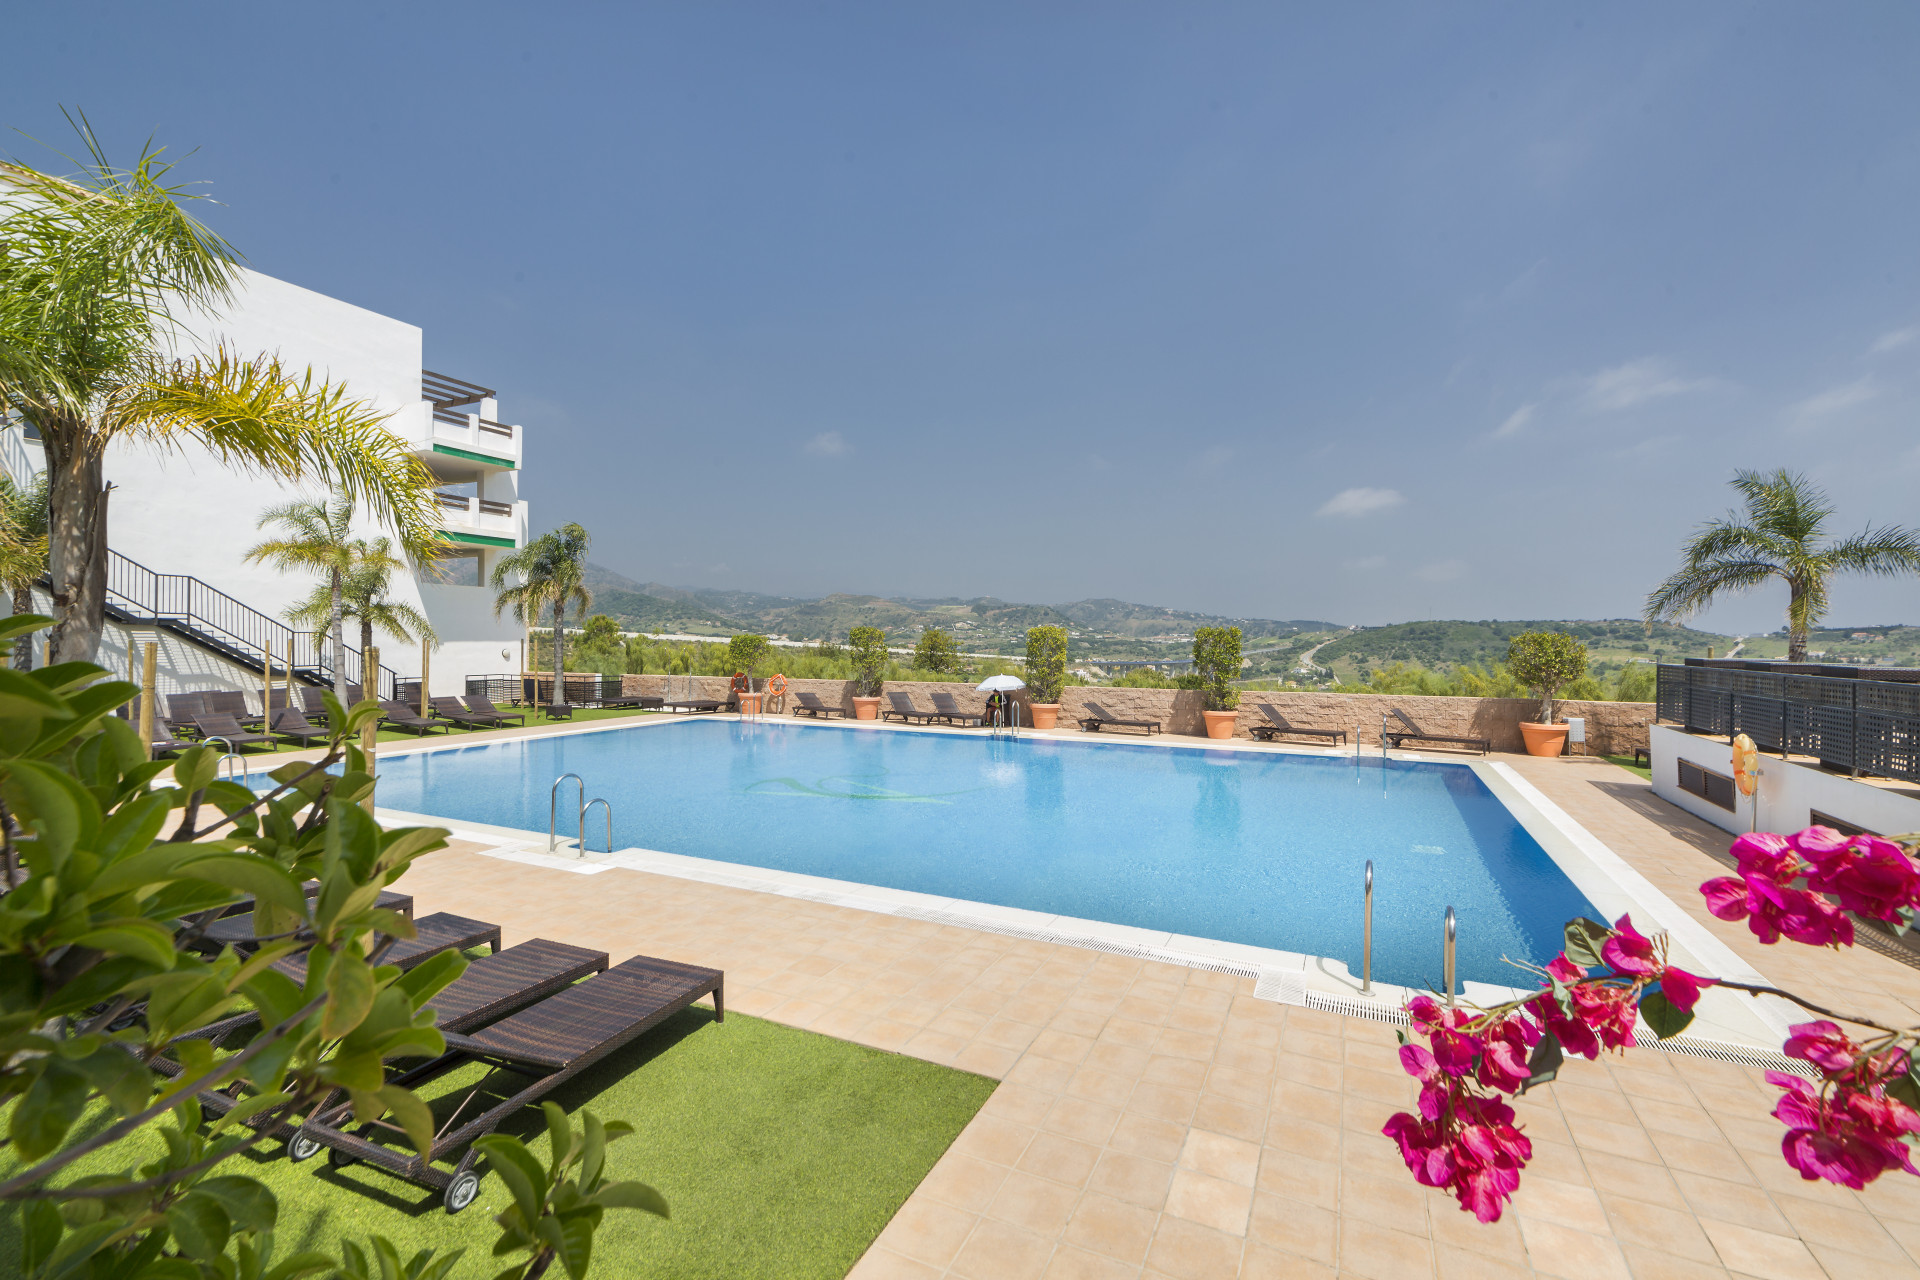 Apartments for sale with 4 star hotel services in Estepona